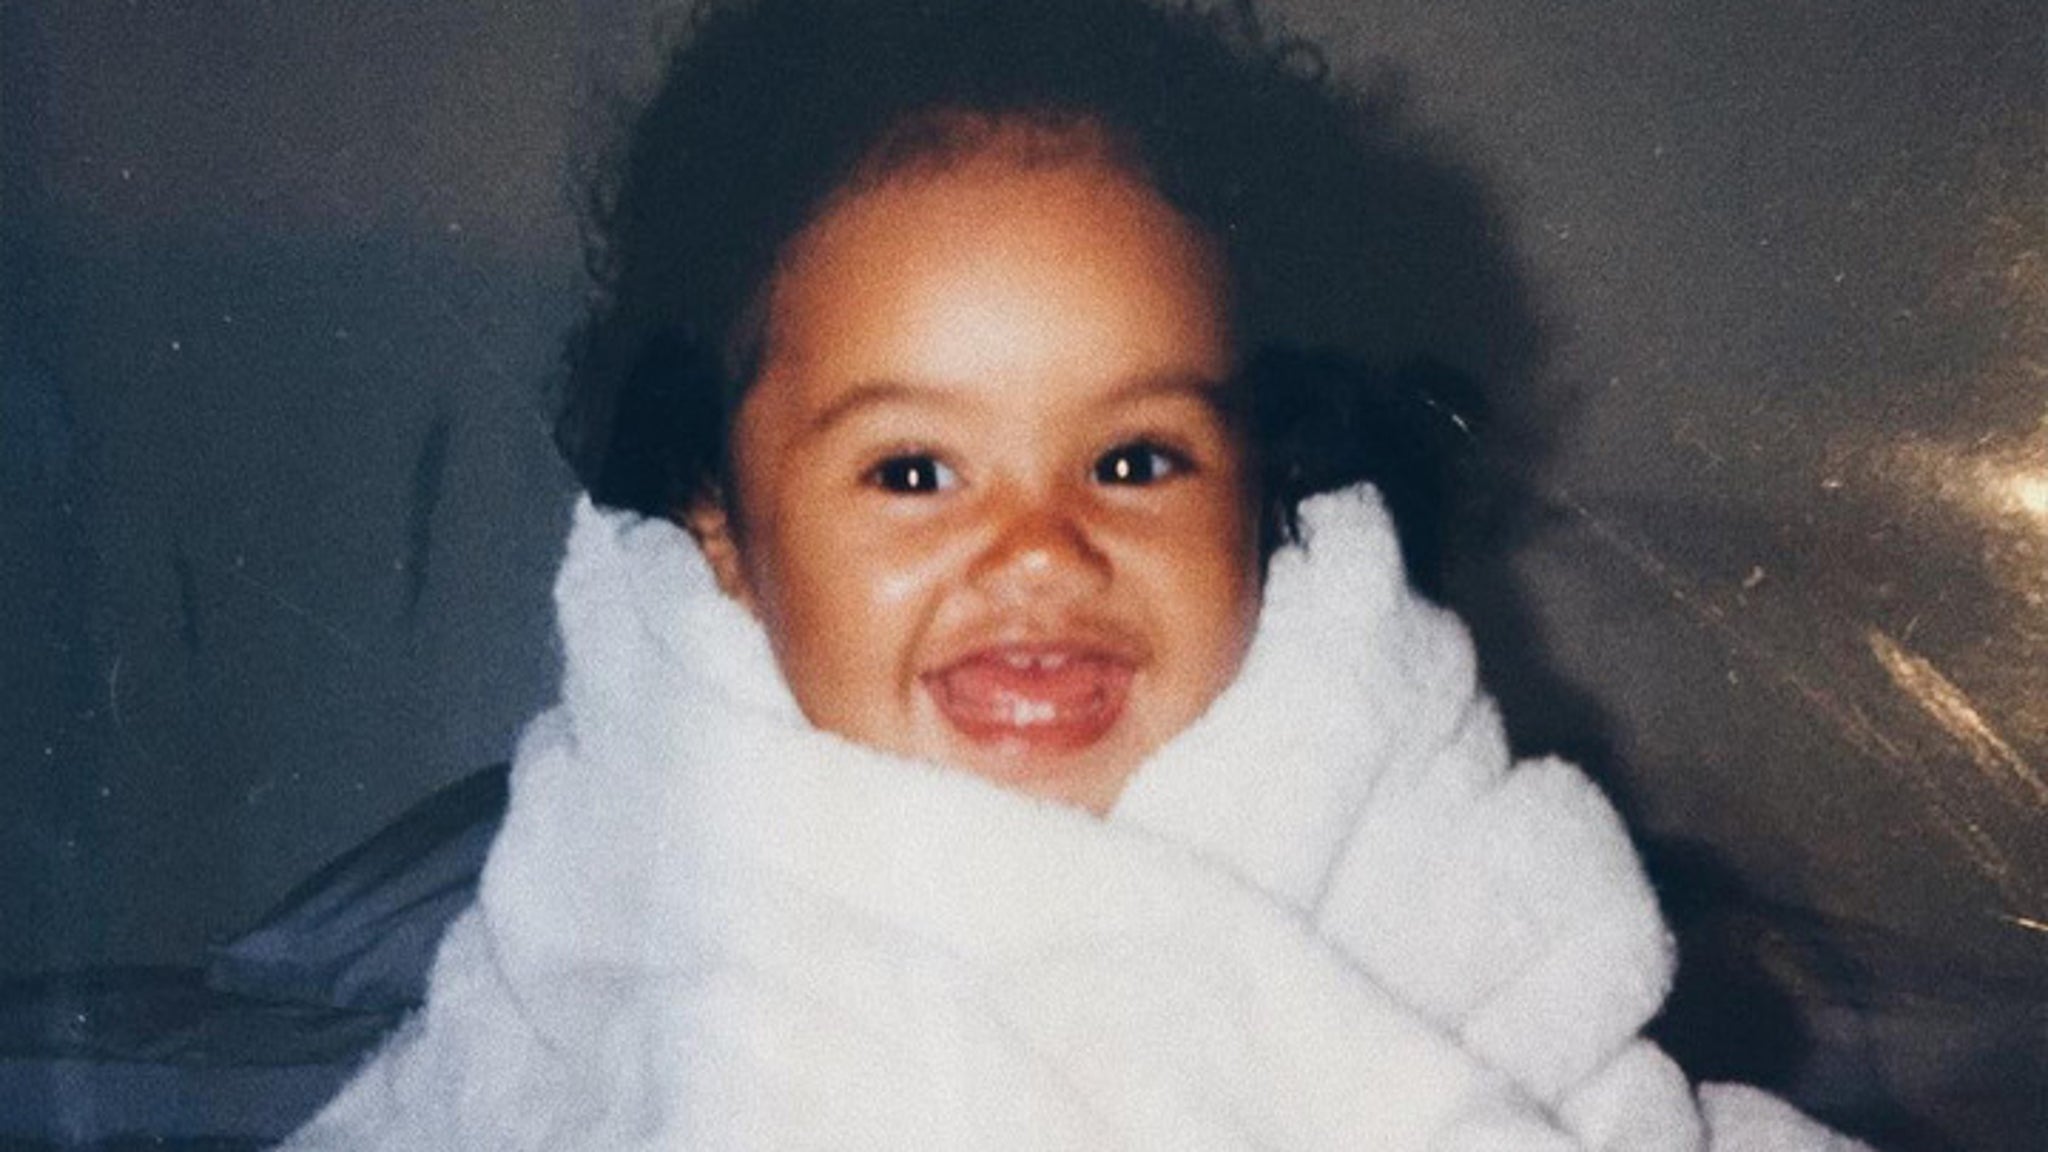 Guess Who This Bundled Up Baby Turned Into!